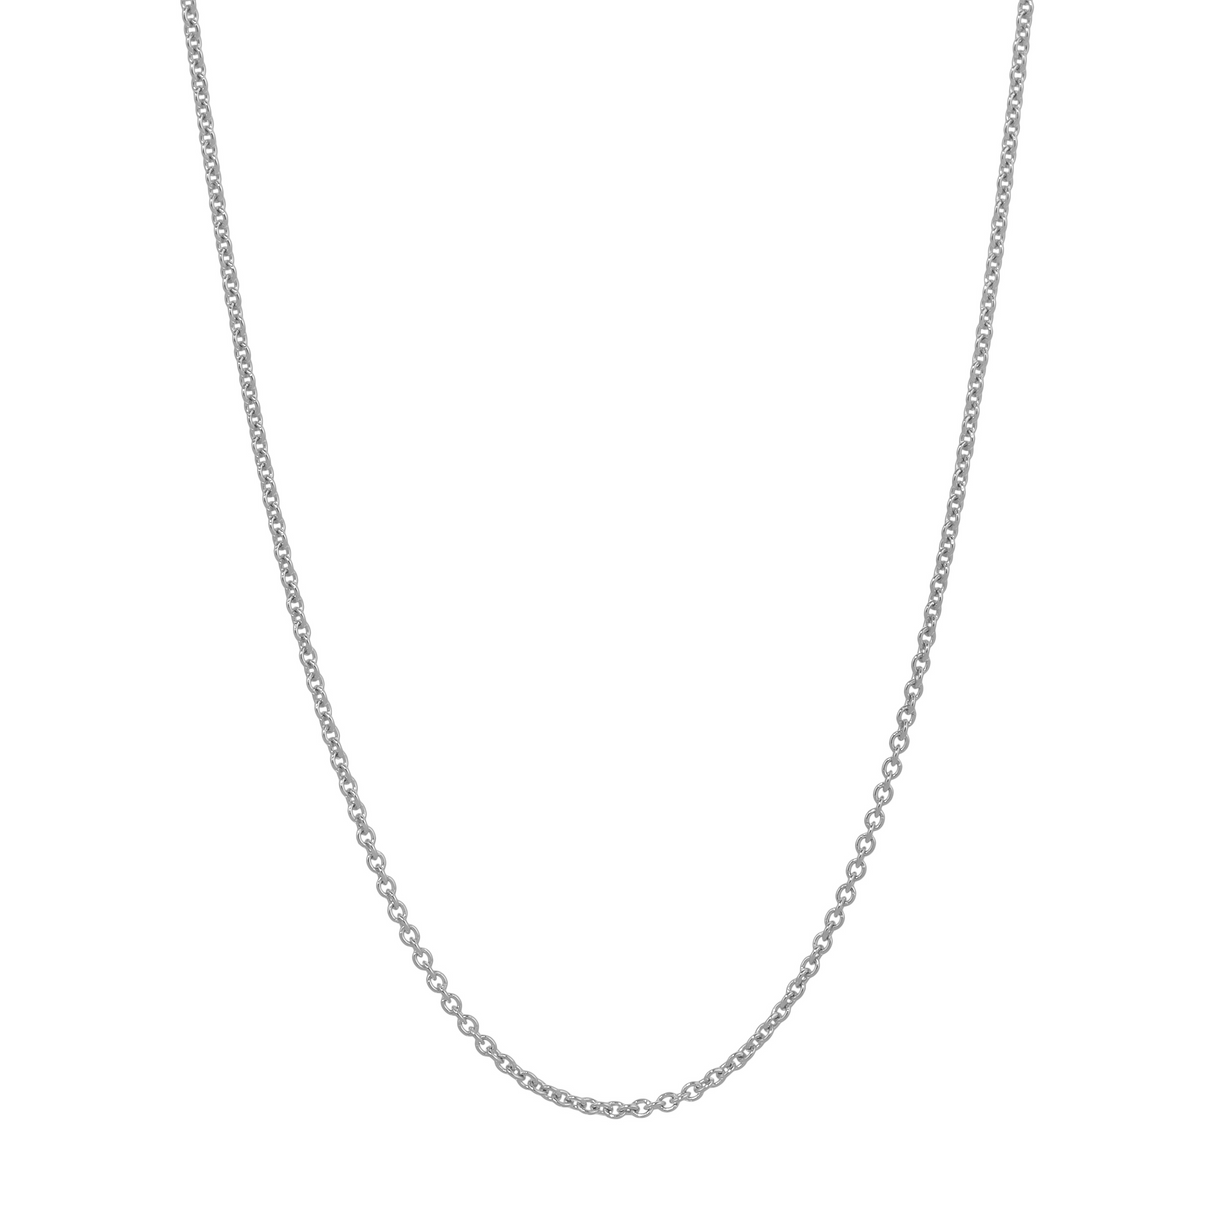 Delicate or bold, this 14K solid white gold rolo chain (0.75mm-1.1mm) adds a touch of elegance.